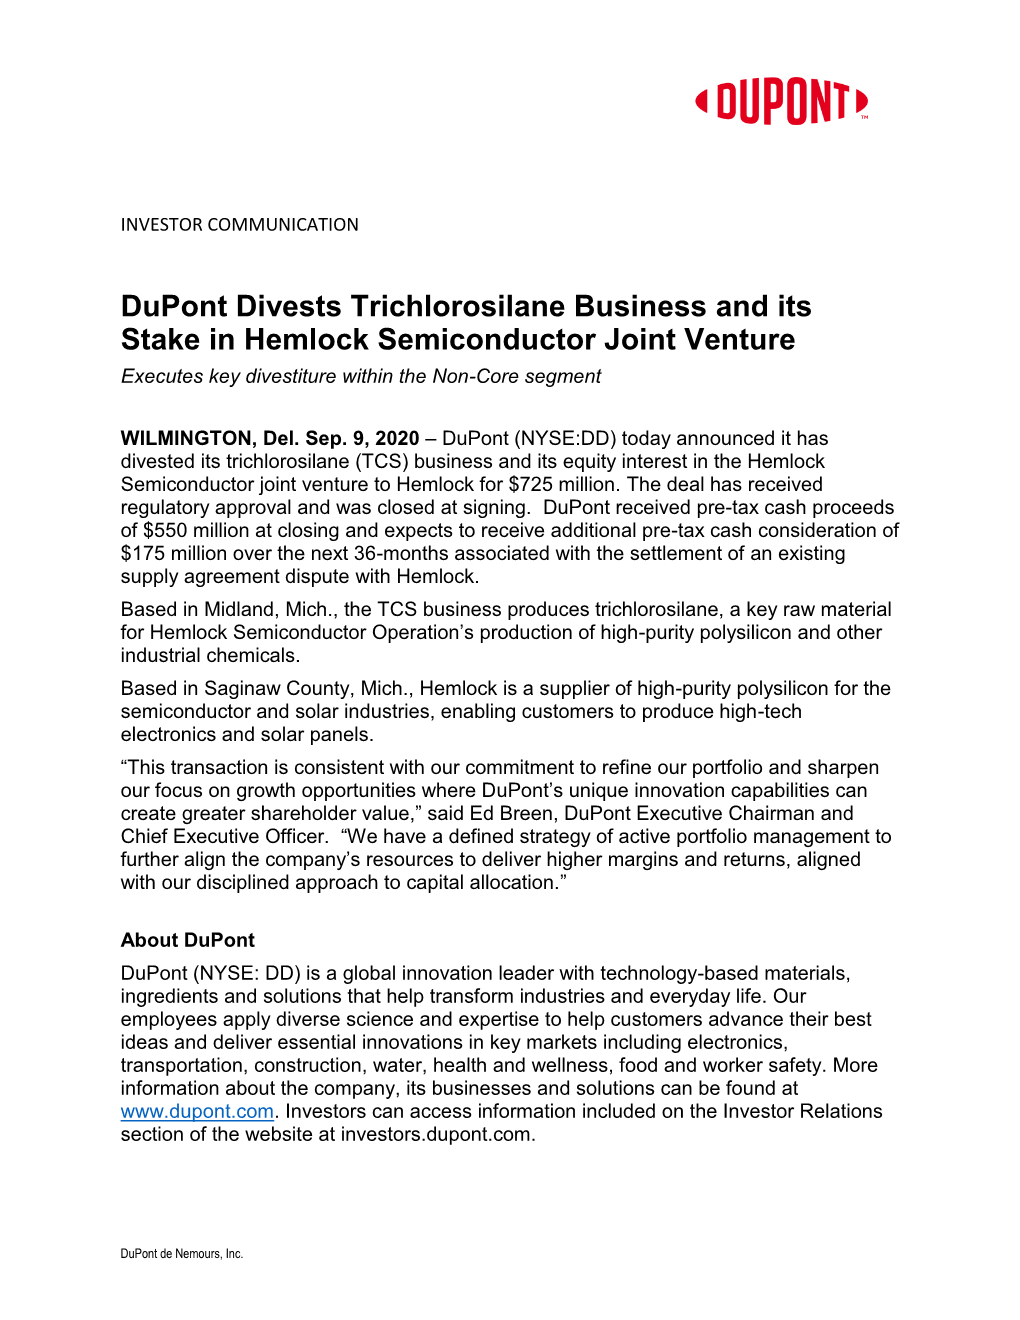 Dupont Divests Trichlorosilane Business and Its Stake in Hemlock Semiconductor Joint Venture Executes Key Divestiture Within the Non-Core Segment